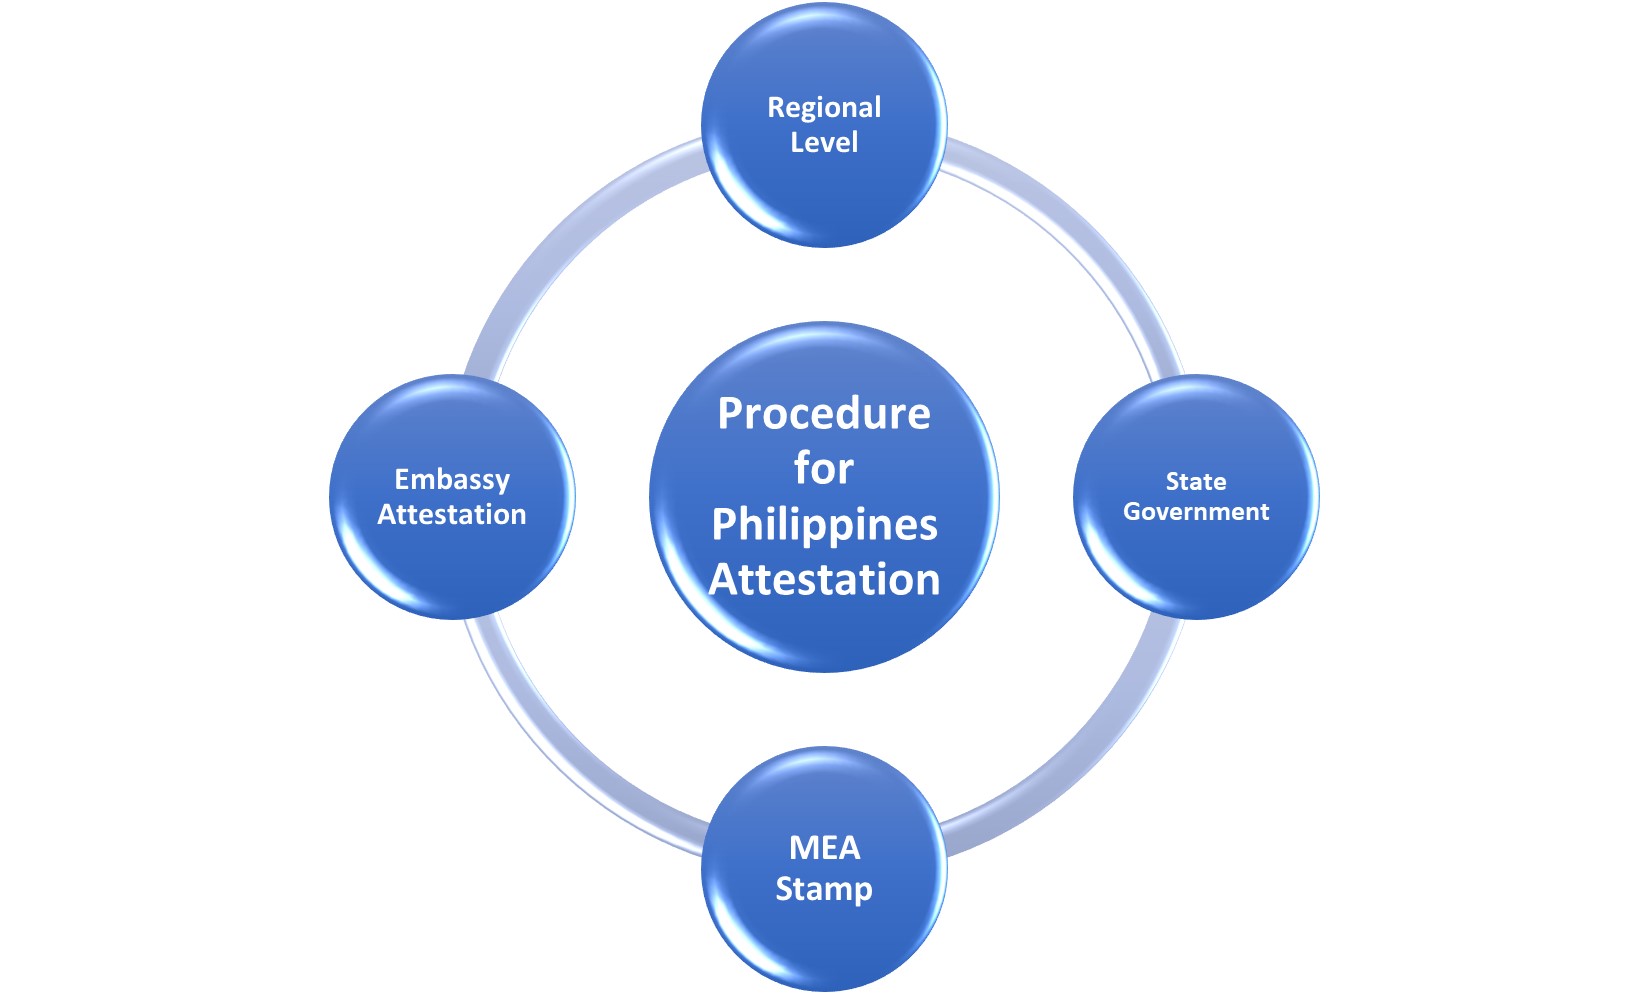 Procedure for Philippines Attestation